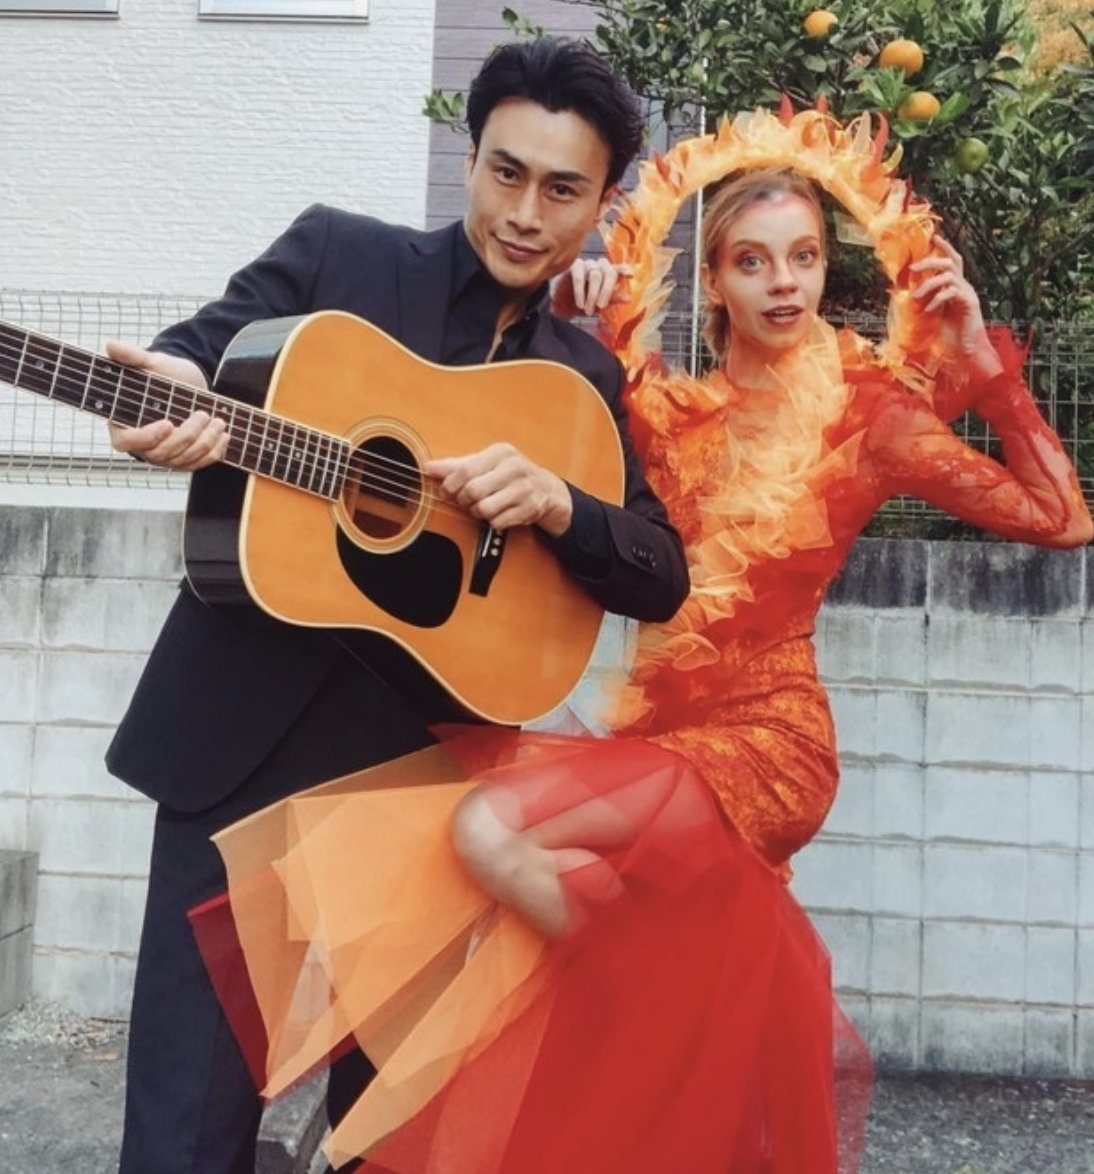 Someone dressed as Johnny Cash, holding a guitar, while another person dresses in fiery red